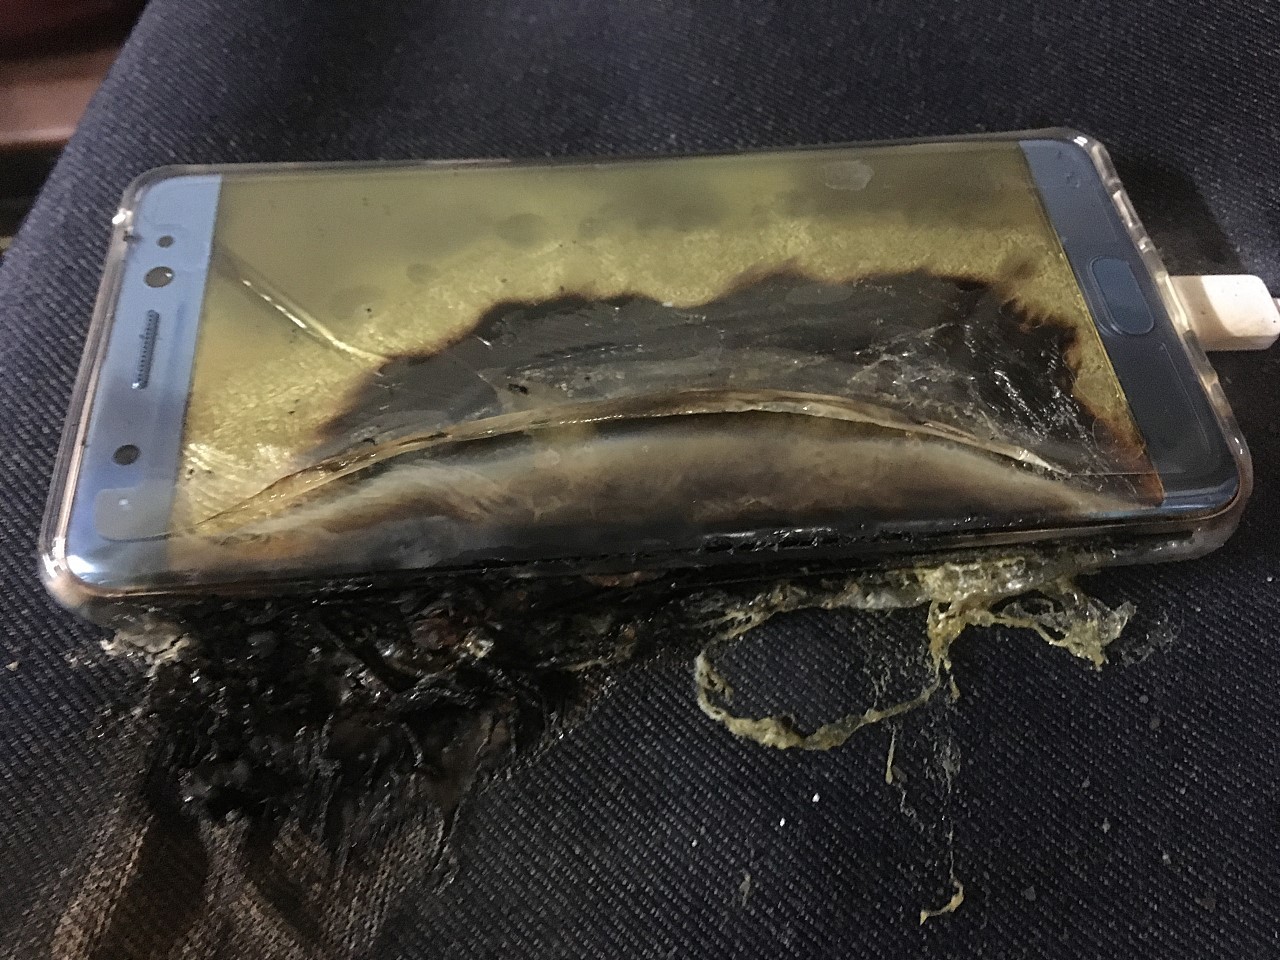 Galaxy Note 7 Explosions